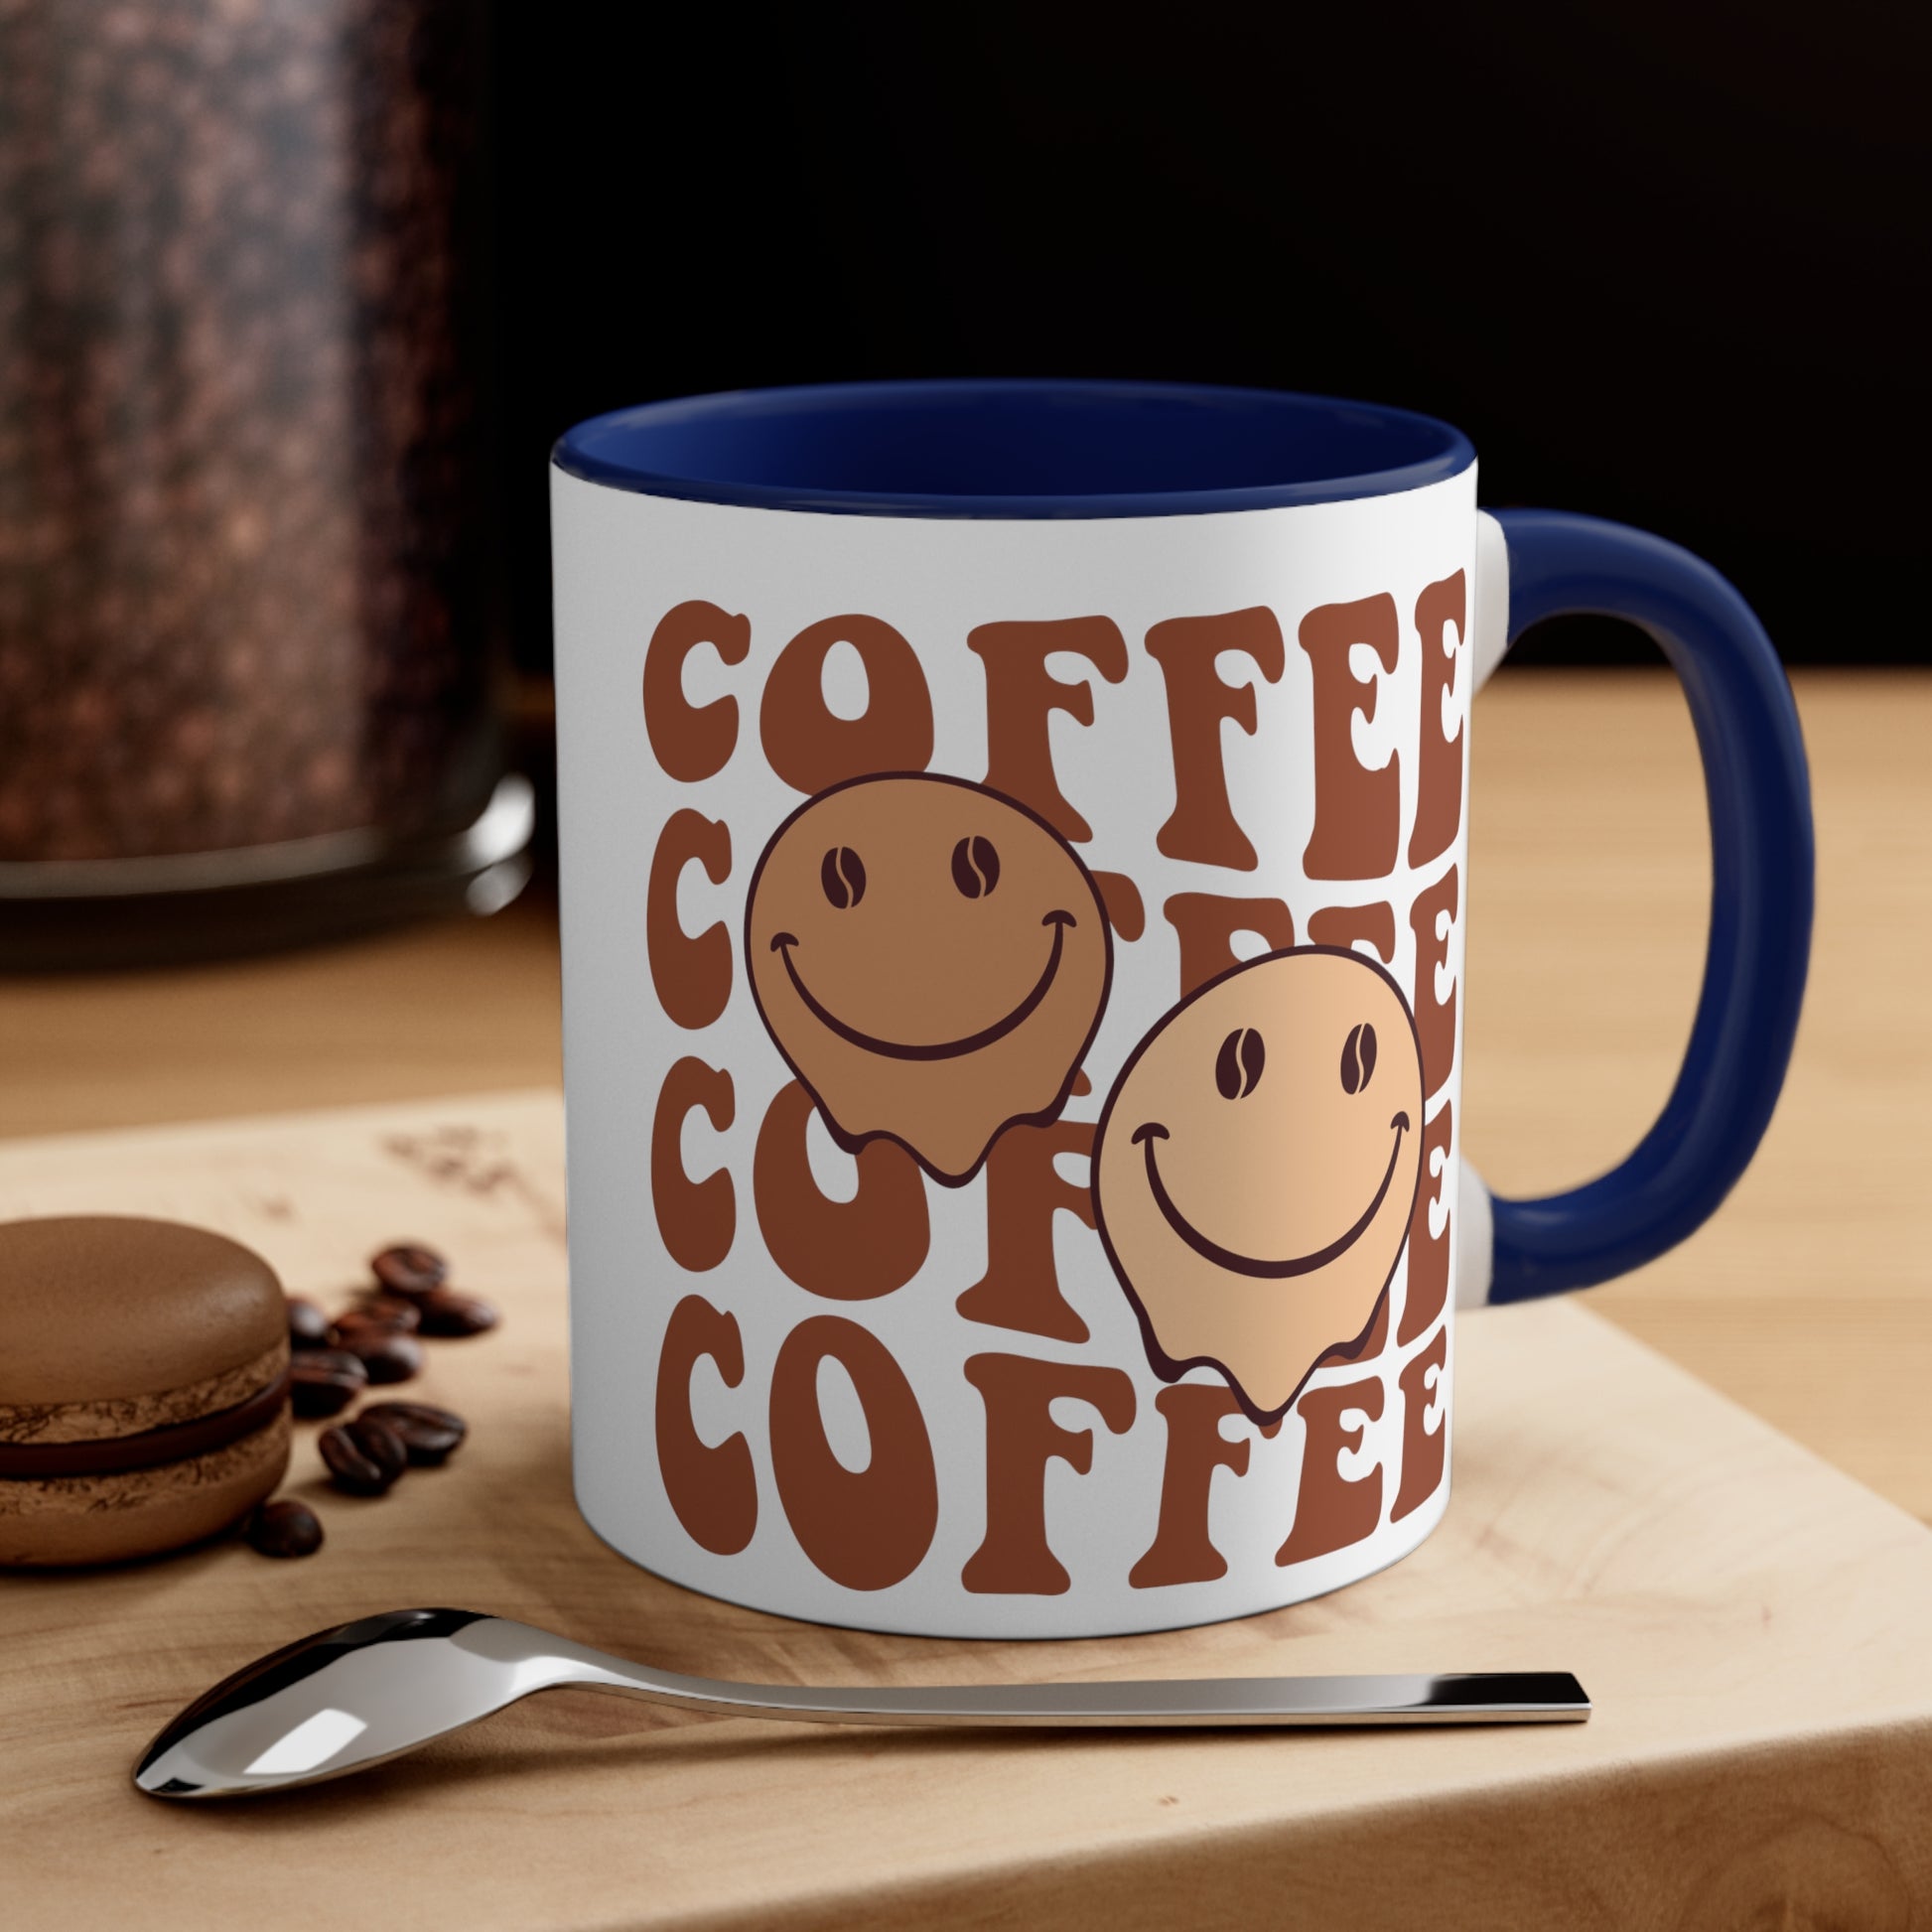 Smiling happy face accent coffee mug inspirational cup